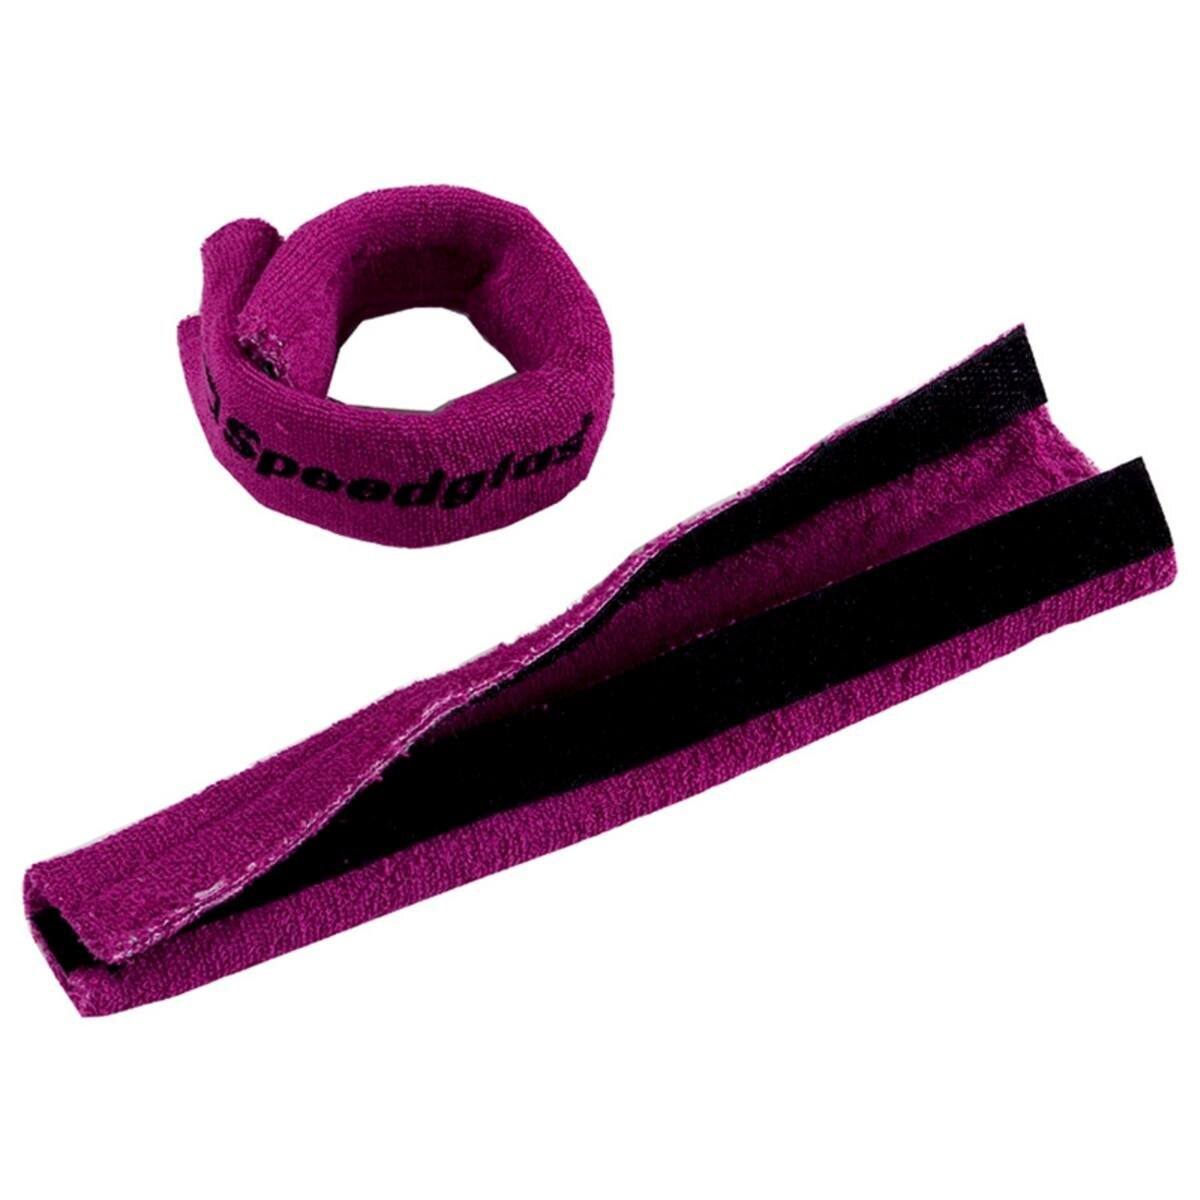 3M Terry towelling sweatband 2-pack #167520